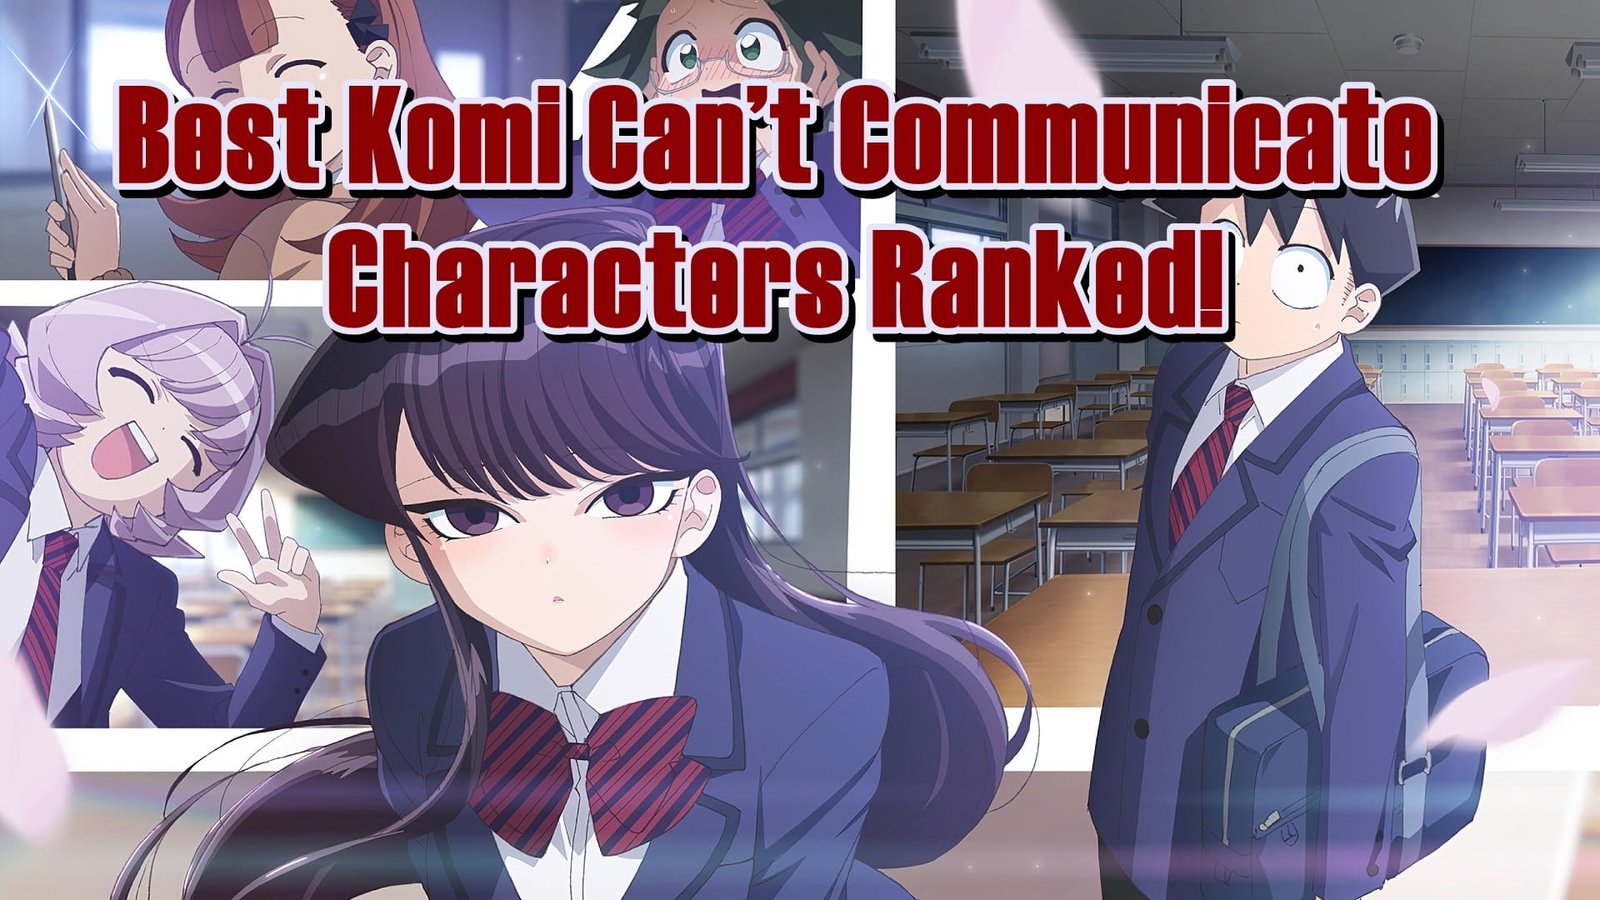 Best Komi Can’t Communicate Characters Ranked!